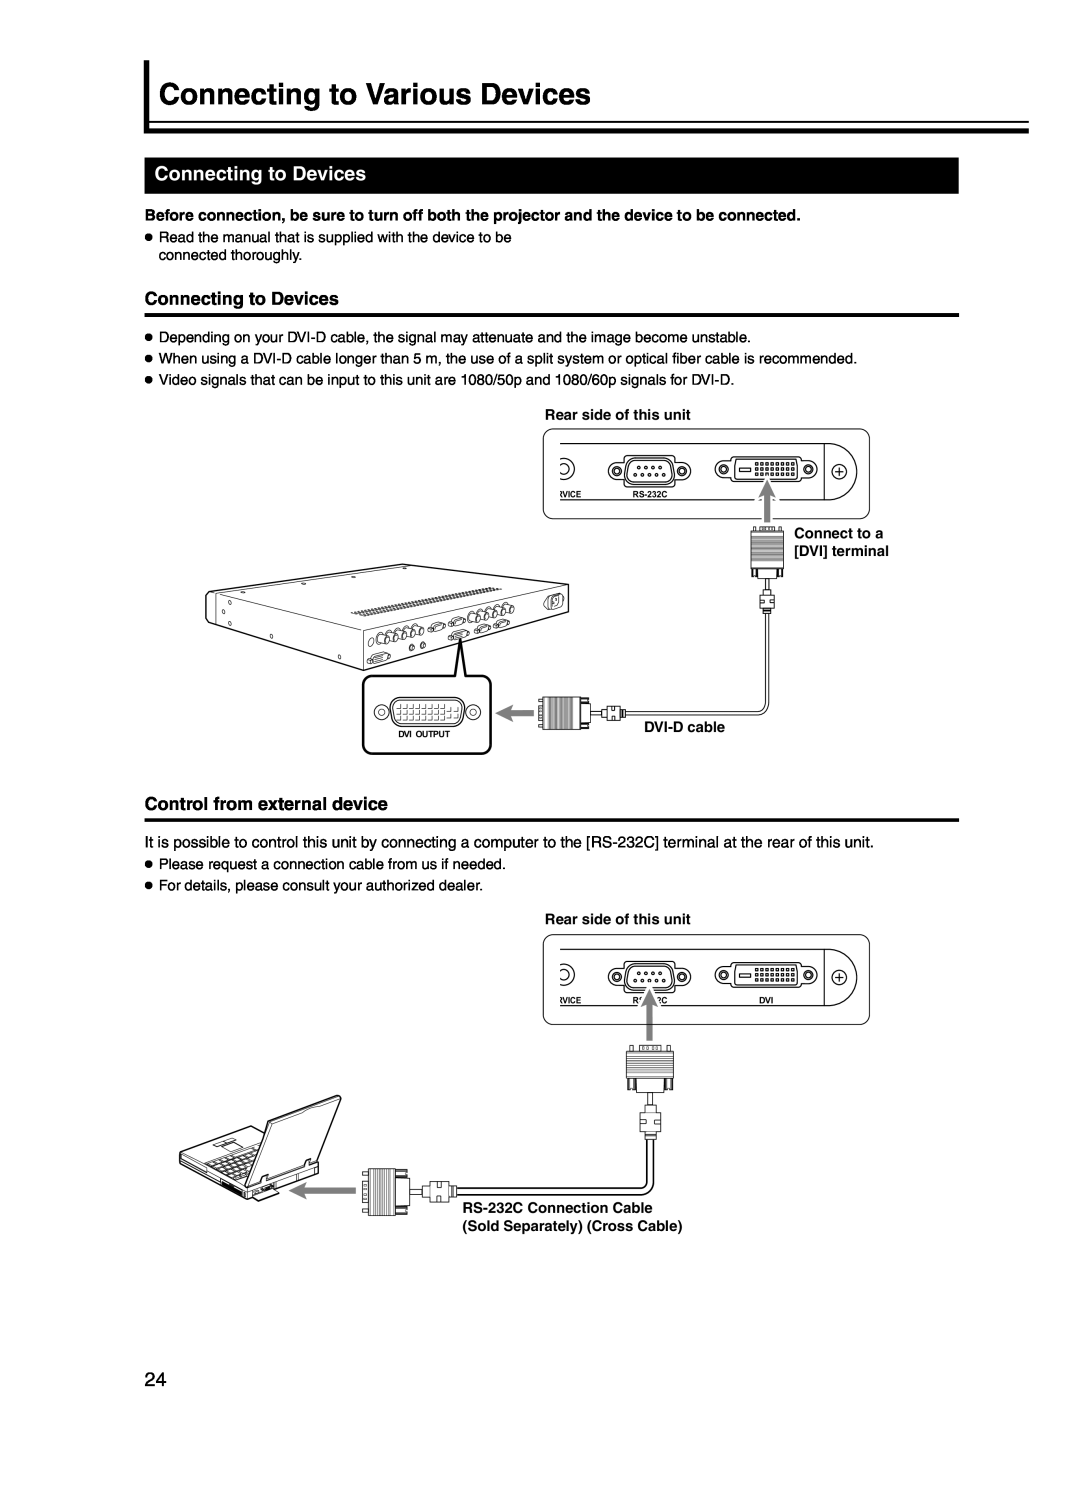 JVC DLA-HD10KU/E manual Connecting to Various Devices, Connecting to Devices, Control from external device, DVI-D cable 